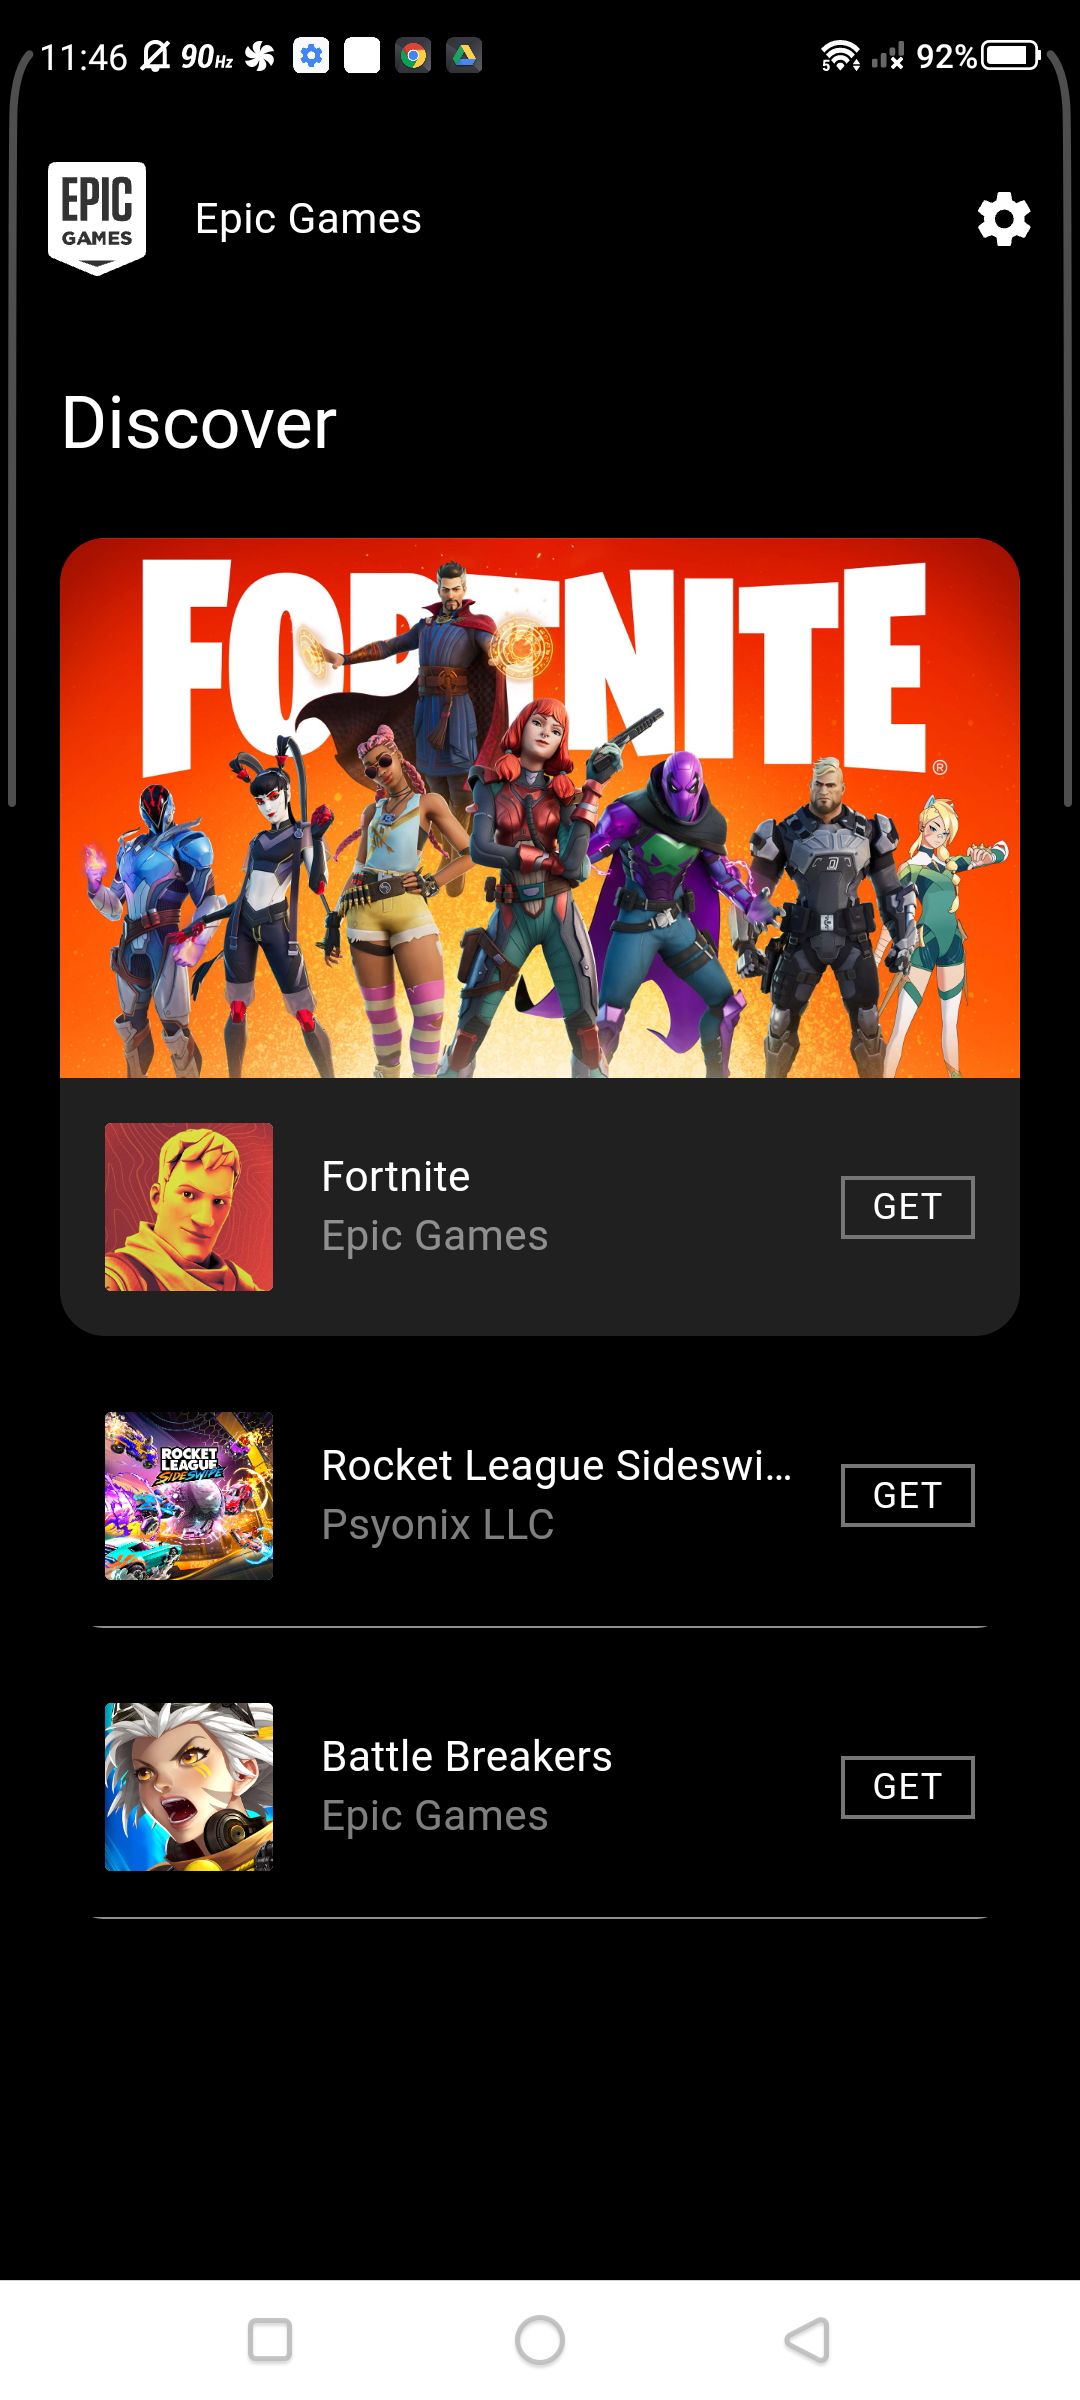  Fortnite on the Epic Games app in Discover section